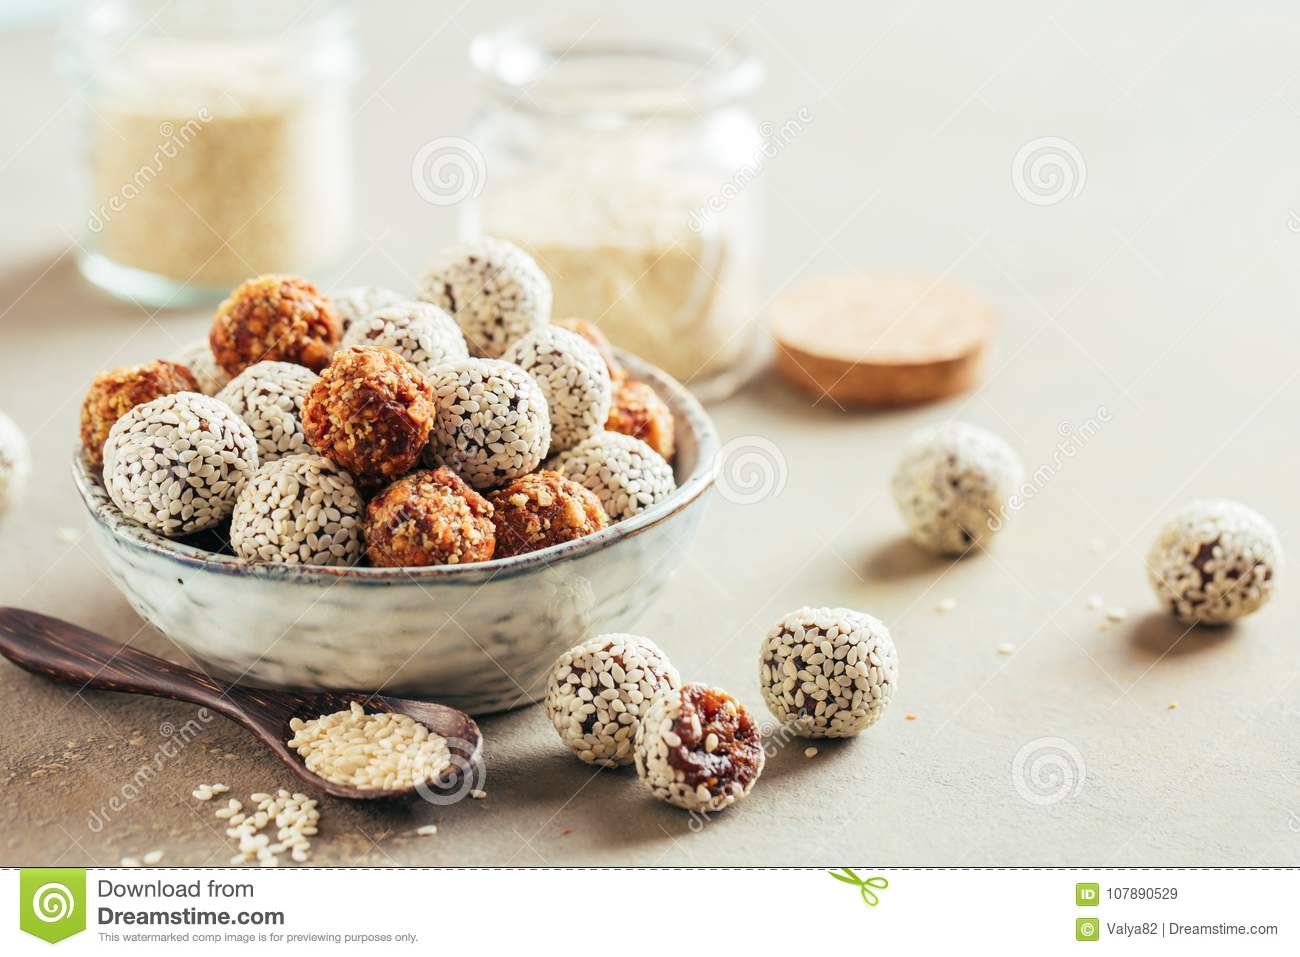 raw-vegan-candy-healthy-energy-balls-made-dried-fruits-nuts-food-107890529.jpg